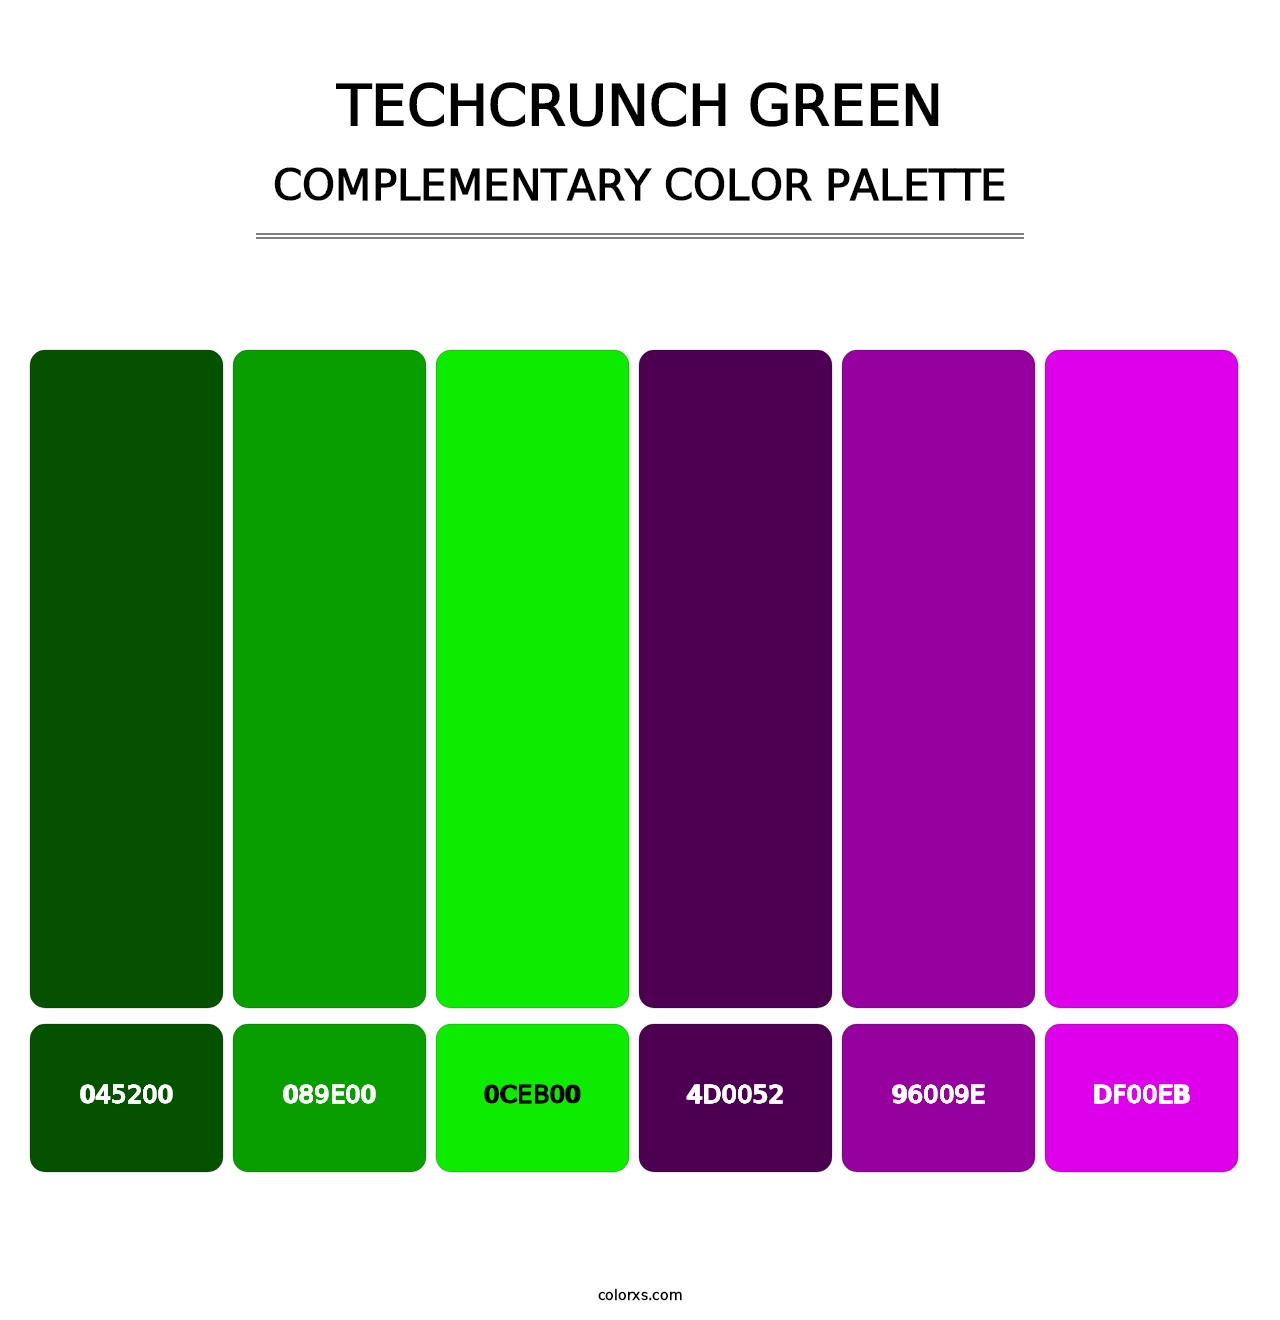 TechCrunch Green - Complementary Color Palette